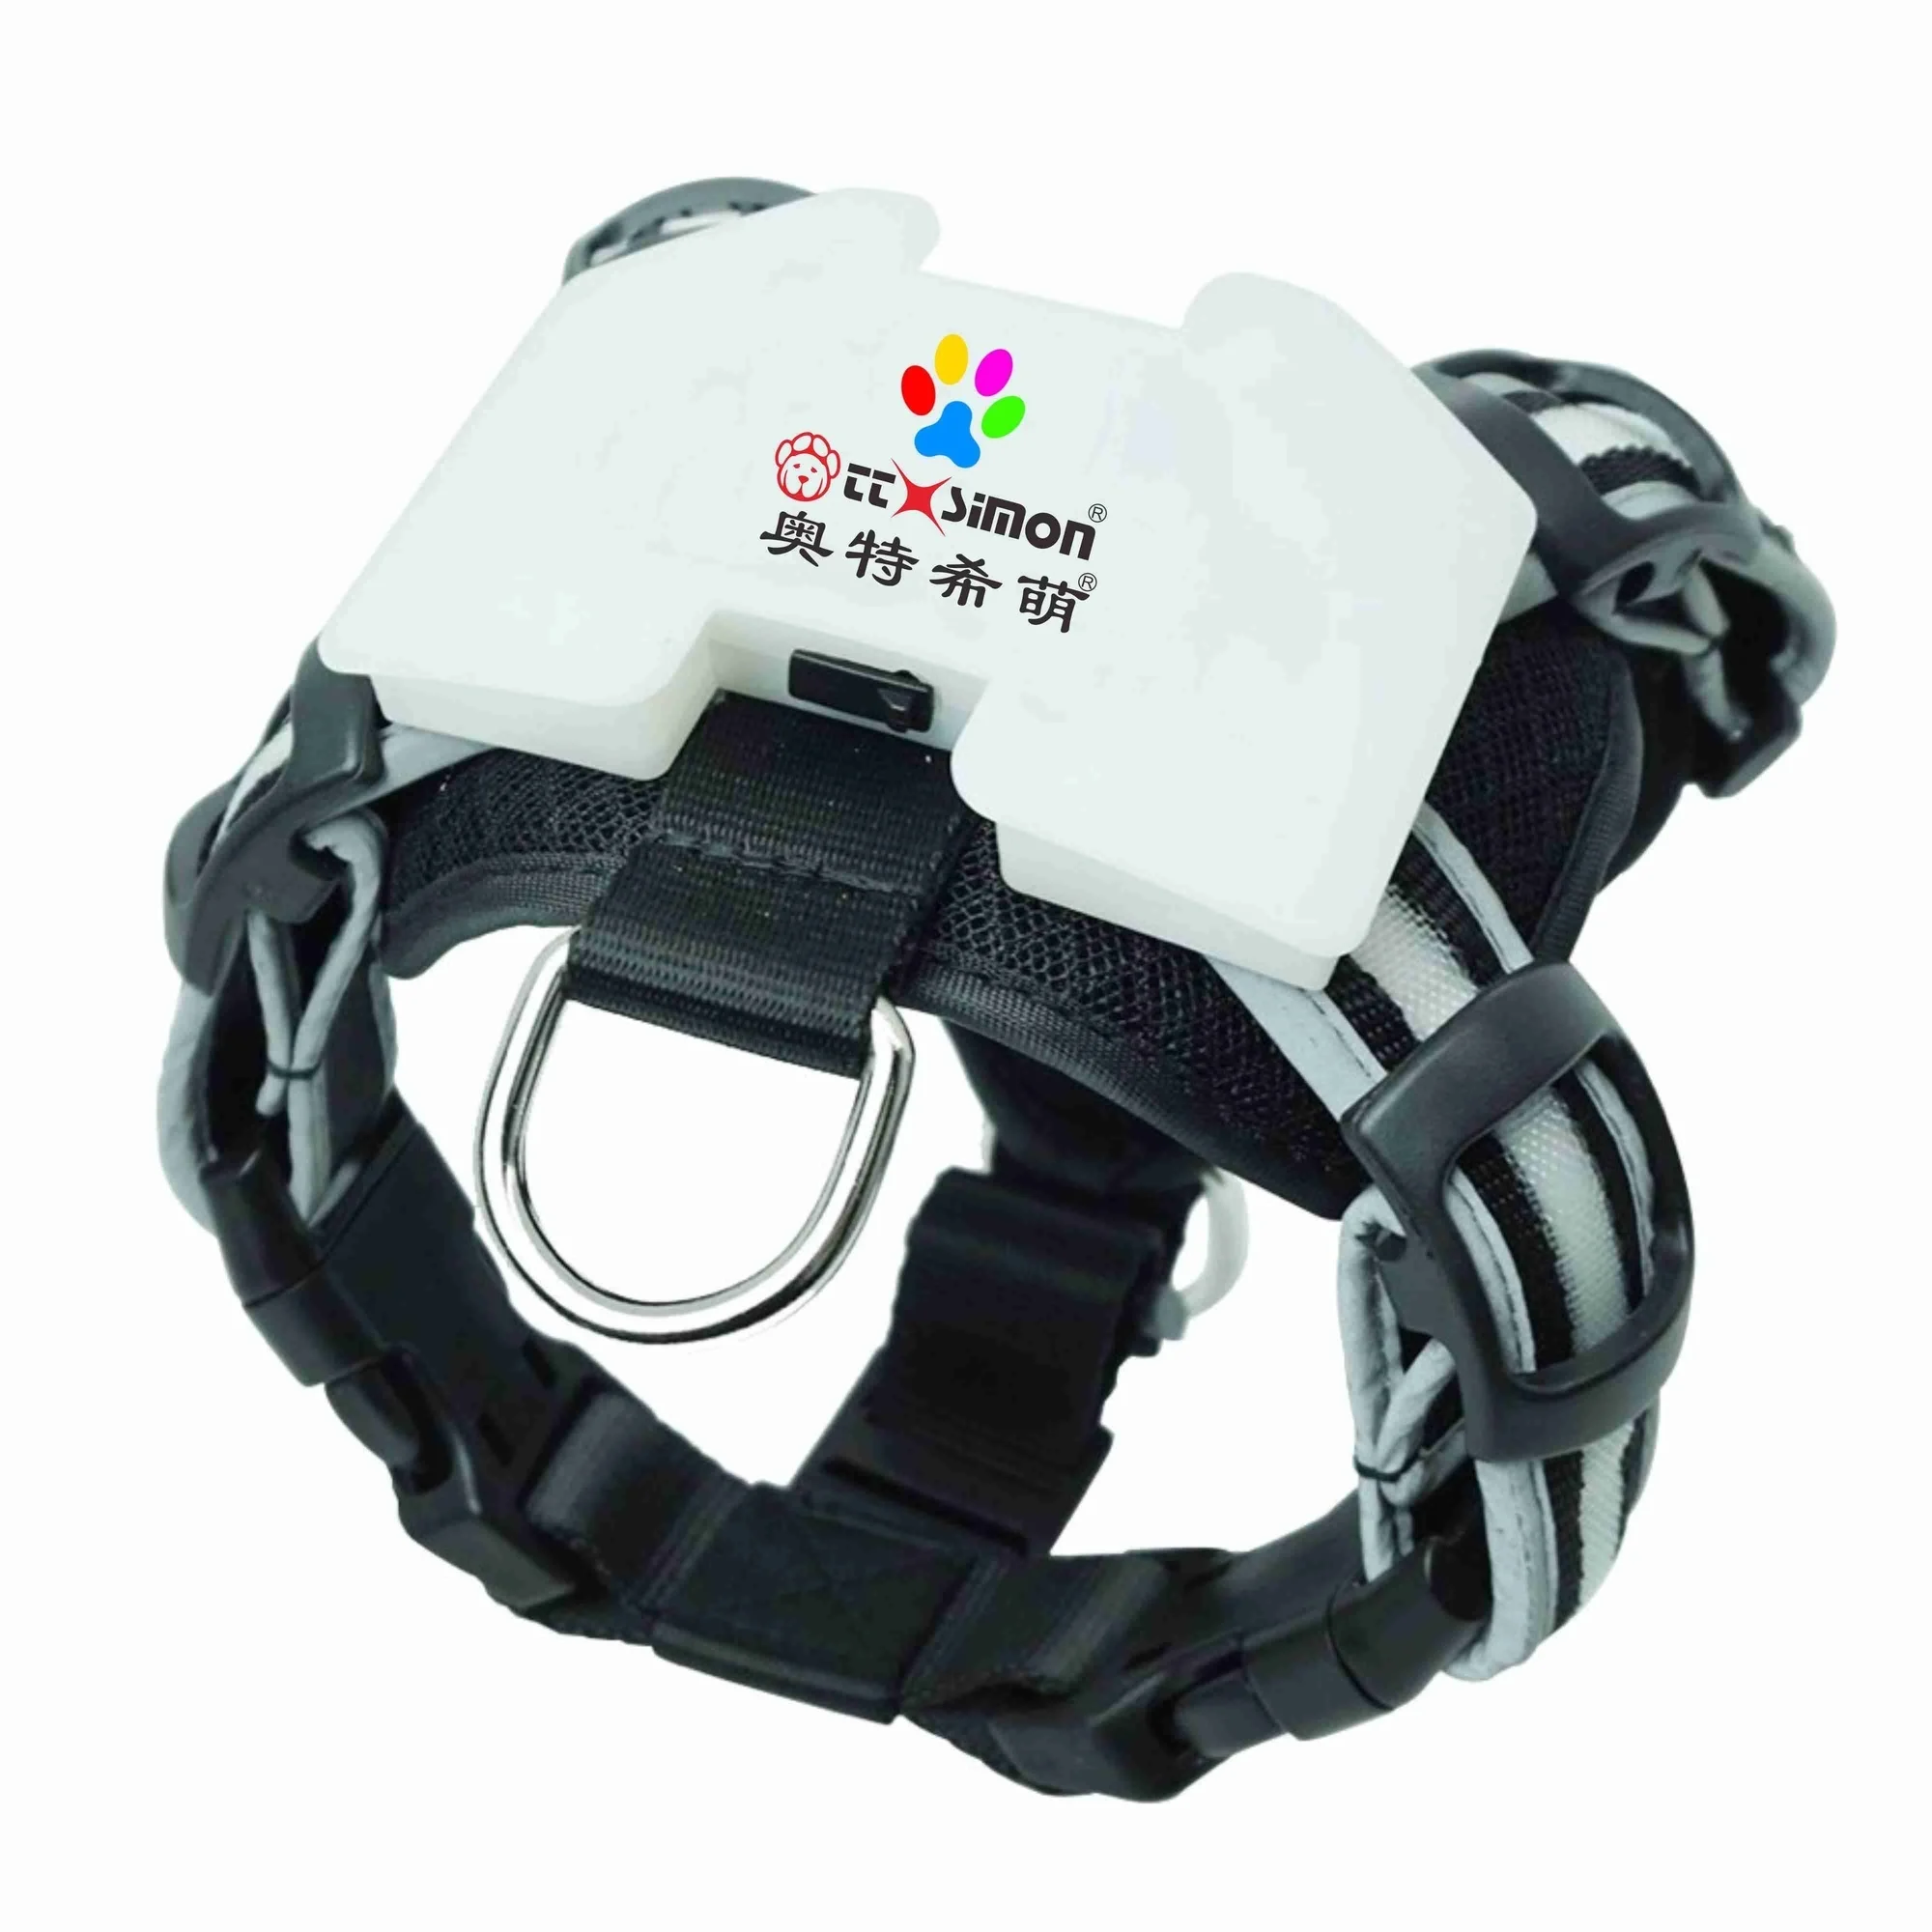 

dog led with collar light cc cimon Polyester Dog Harness And Leash